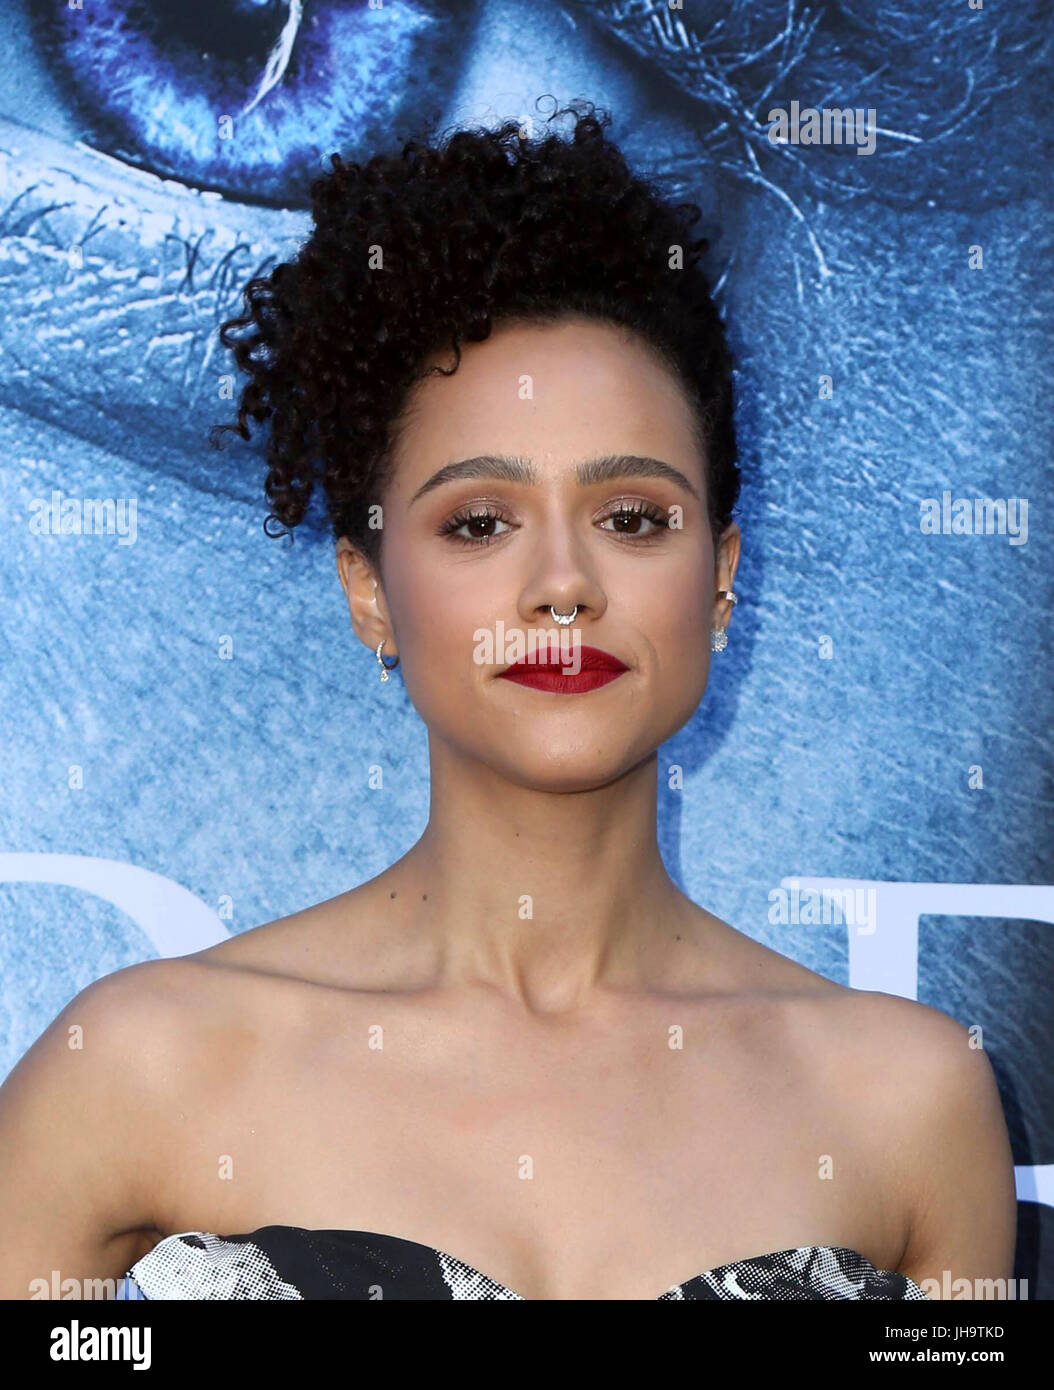 Los Angeles, USA. 12th Jul, 2017. Nathalie Emmanuel, at premiere ofHBO's 'Game Of Thrones' Season 7 at The Walt Disney Concert Hall, California on July 12, 2017. Credit: MediaPunch Inc/Alamy Live News Stock Photo